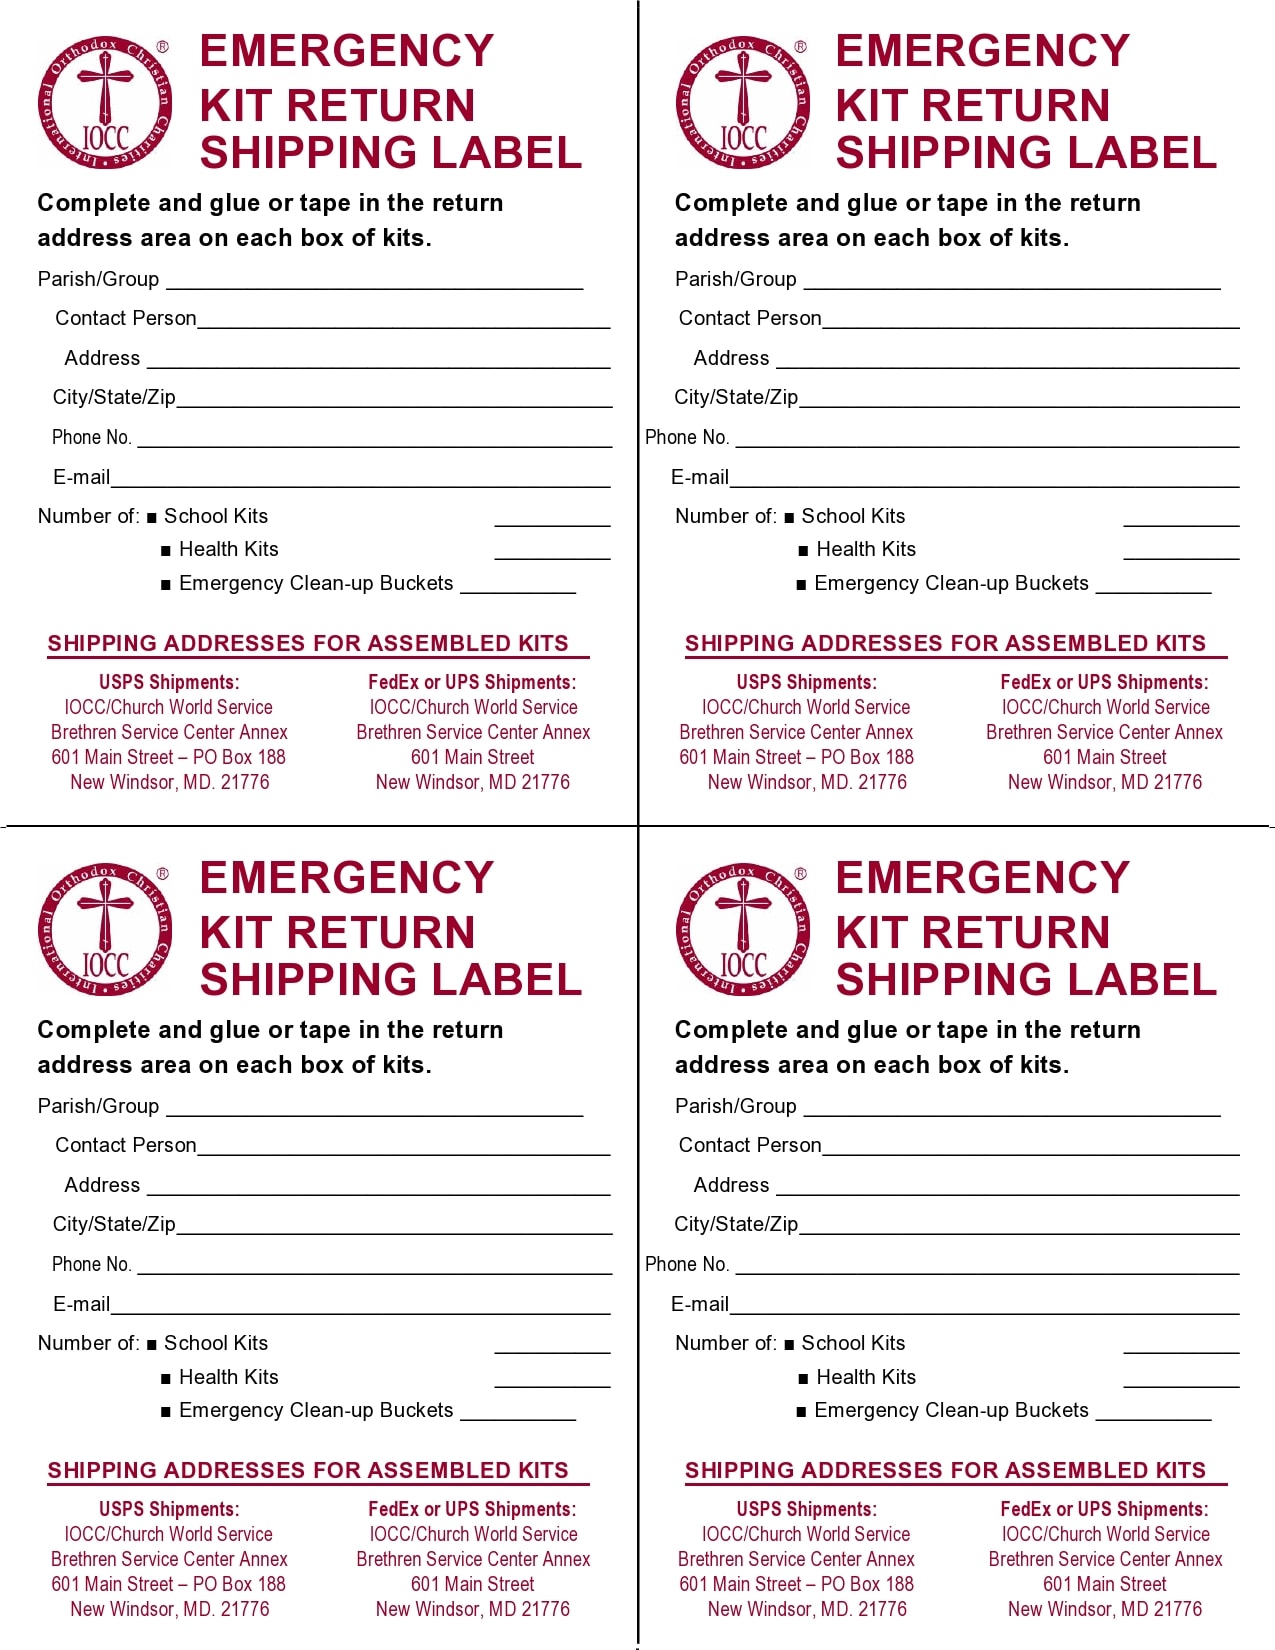 20 Printable Shipping Label Templates (Free) - PrintableTemplates Pertaining To Free Printable Shipping Label Template